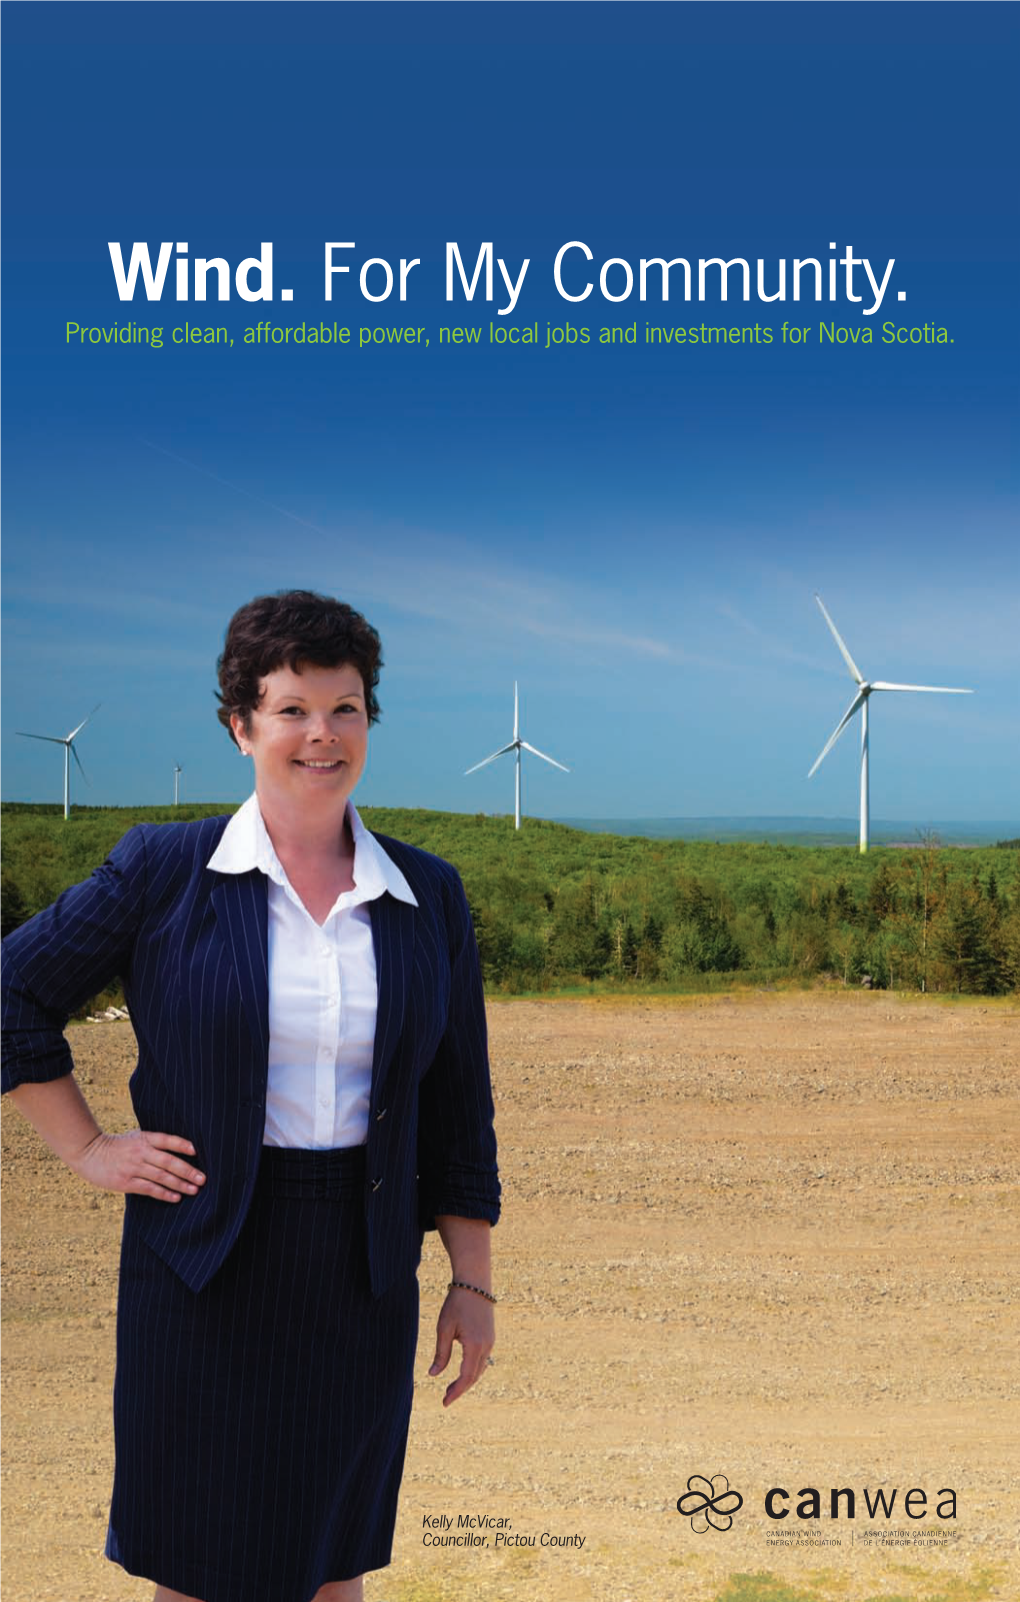 Wind. for My Community. Providing Clean, Affordable Power, New Local Jobs and Investments for Nova Scotia